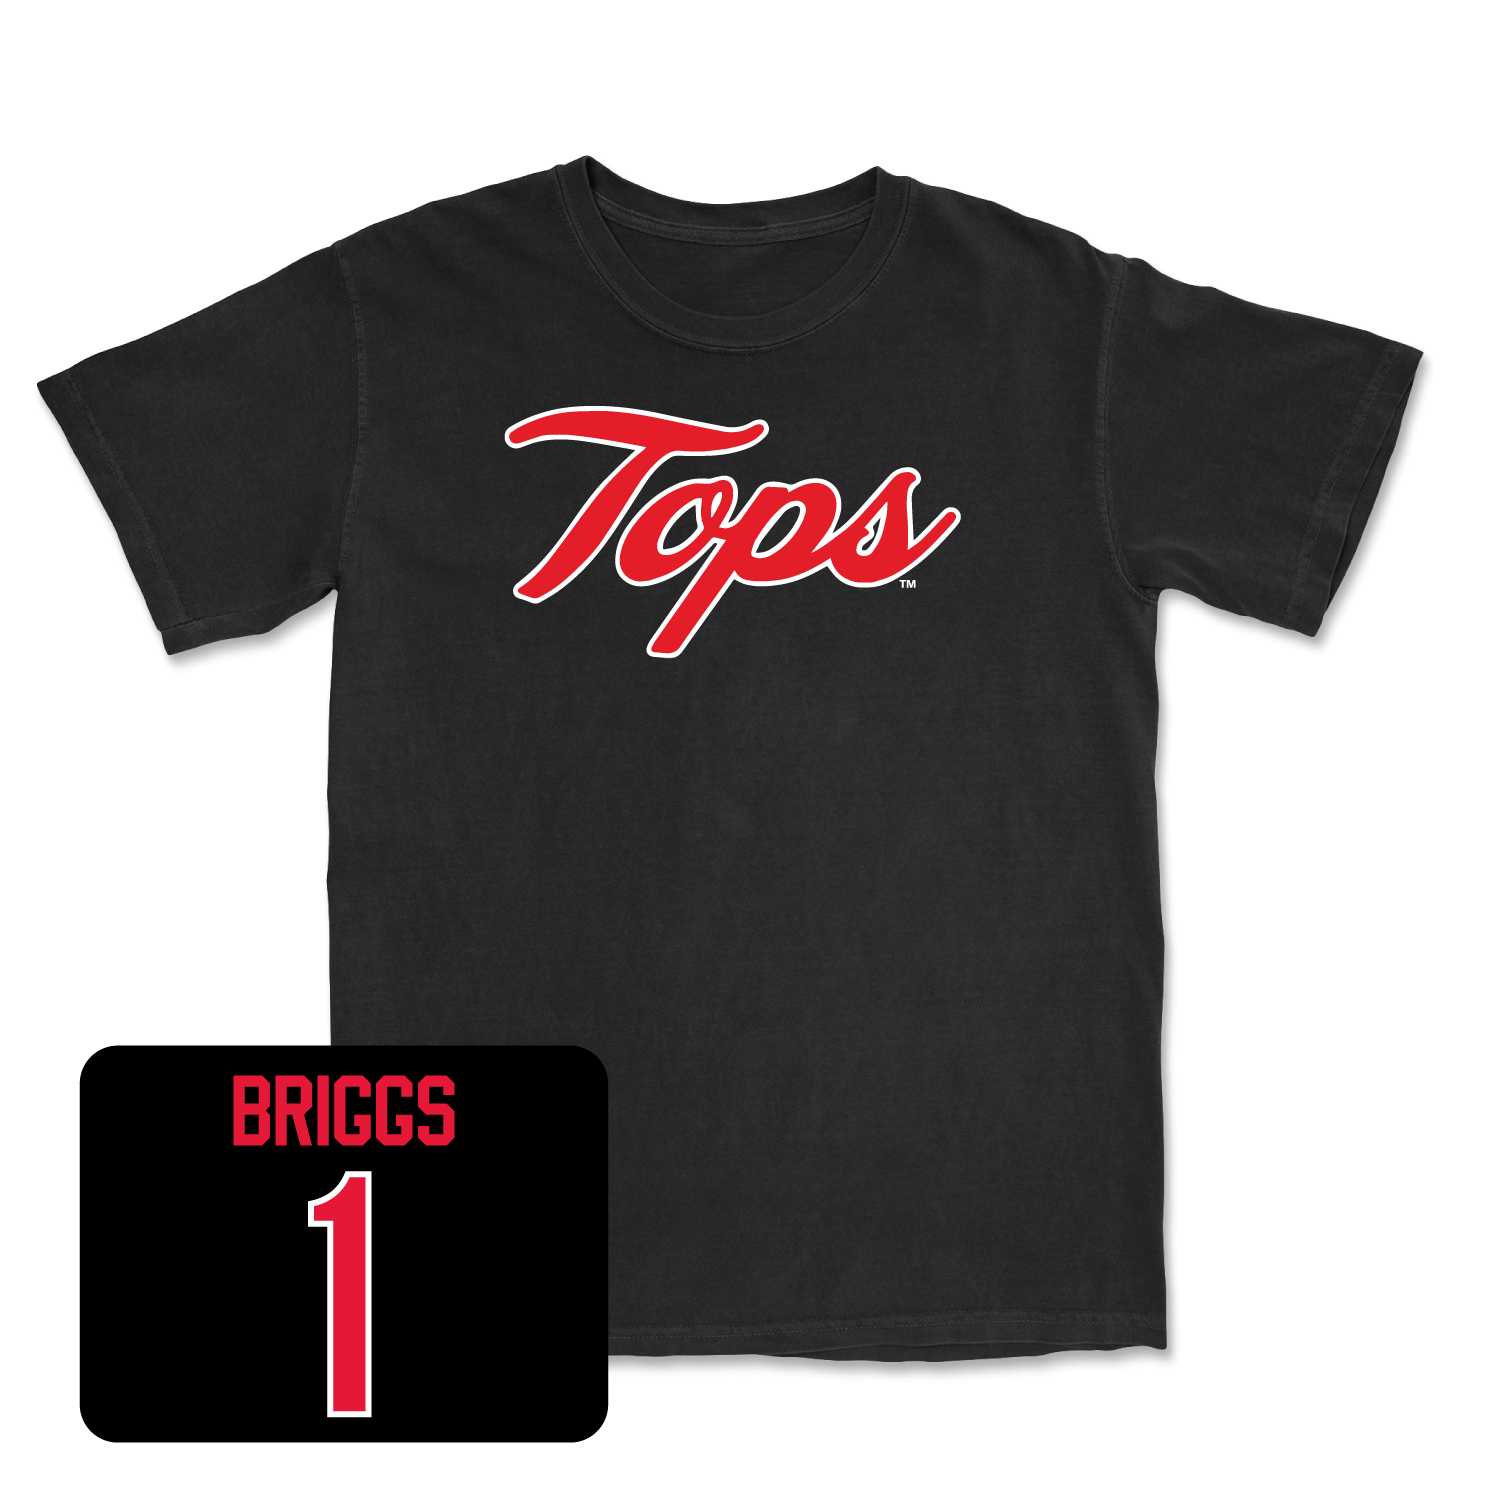 Black Women's Volleyball Tops Tee 3X-Large / Paige Briggs | #1